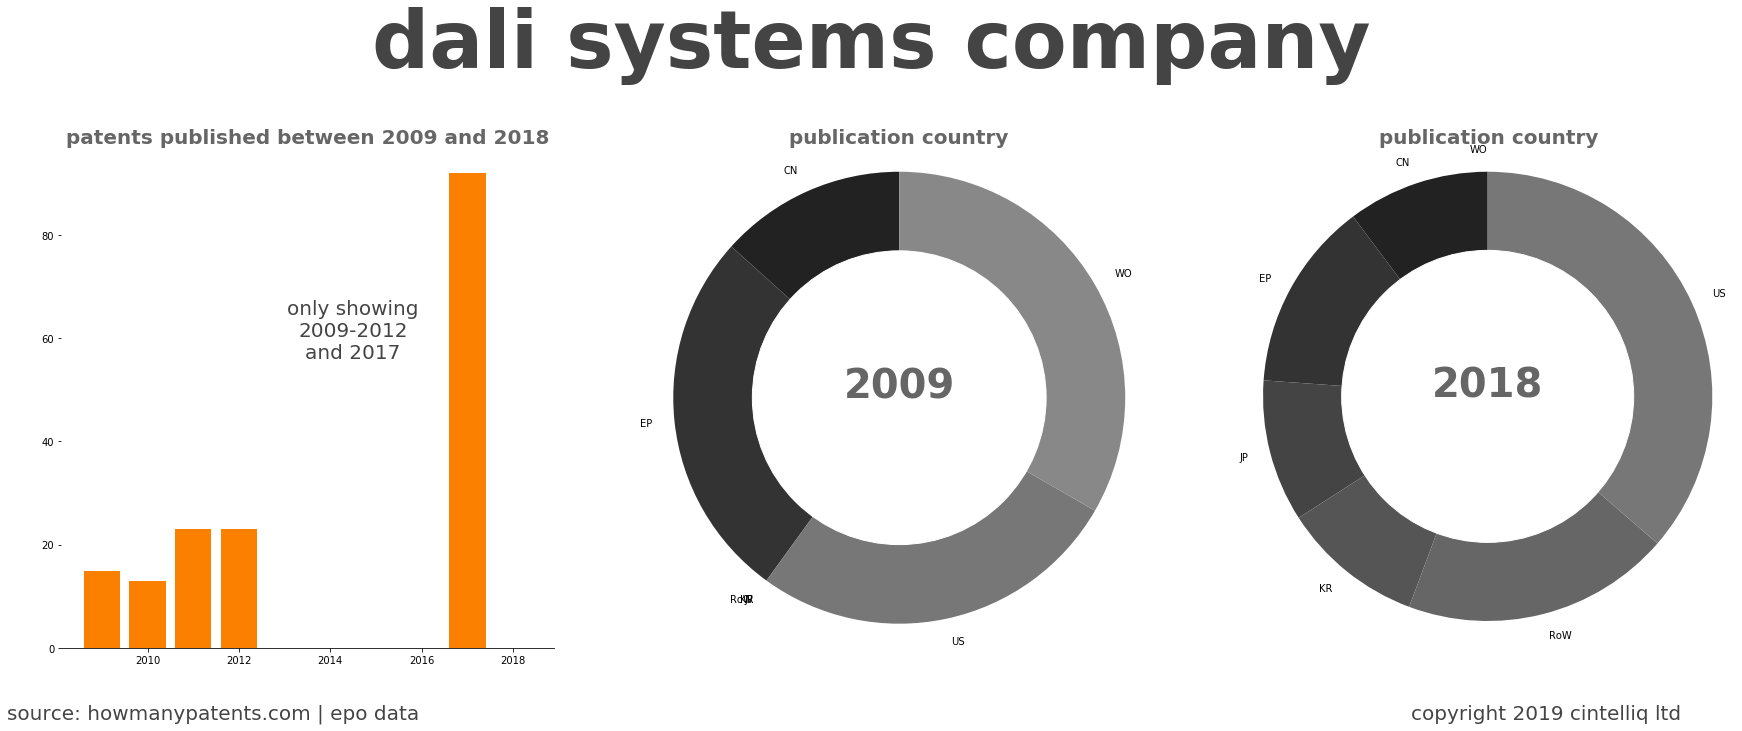 summary of patents for Dali Systems Company